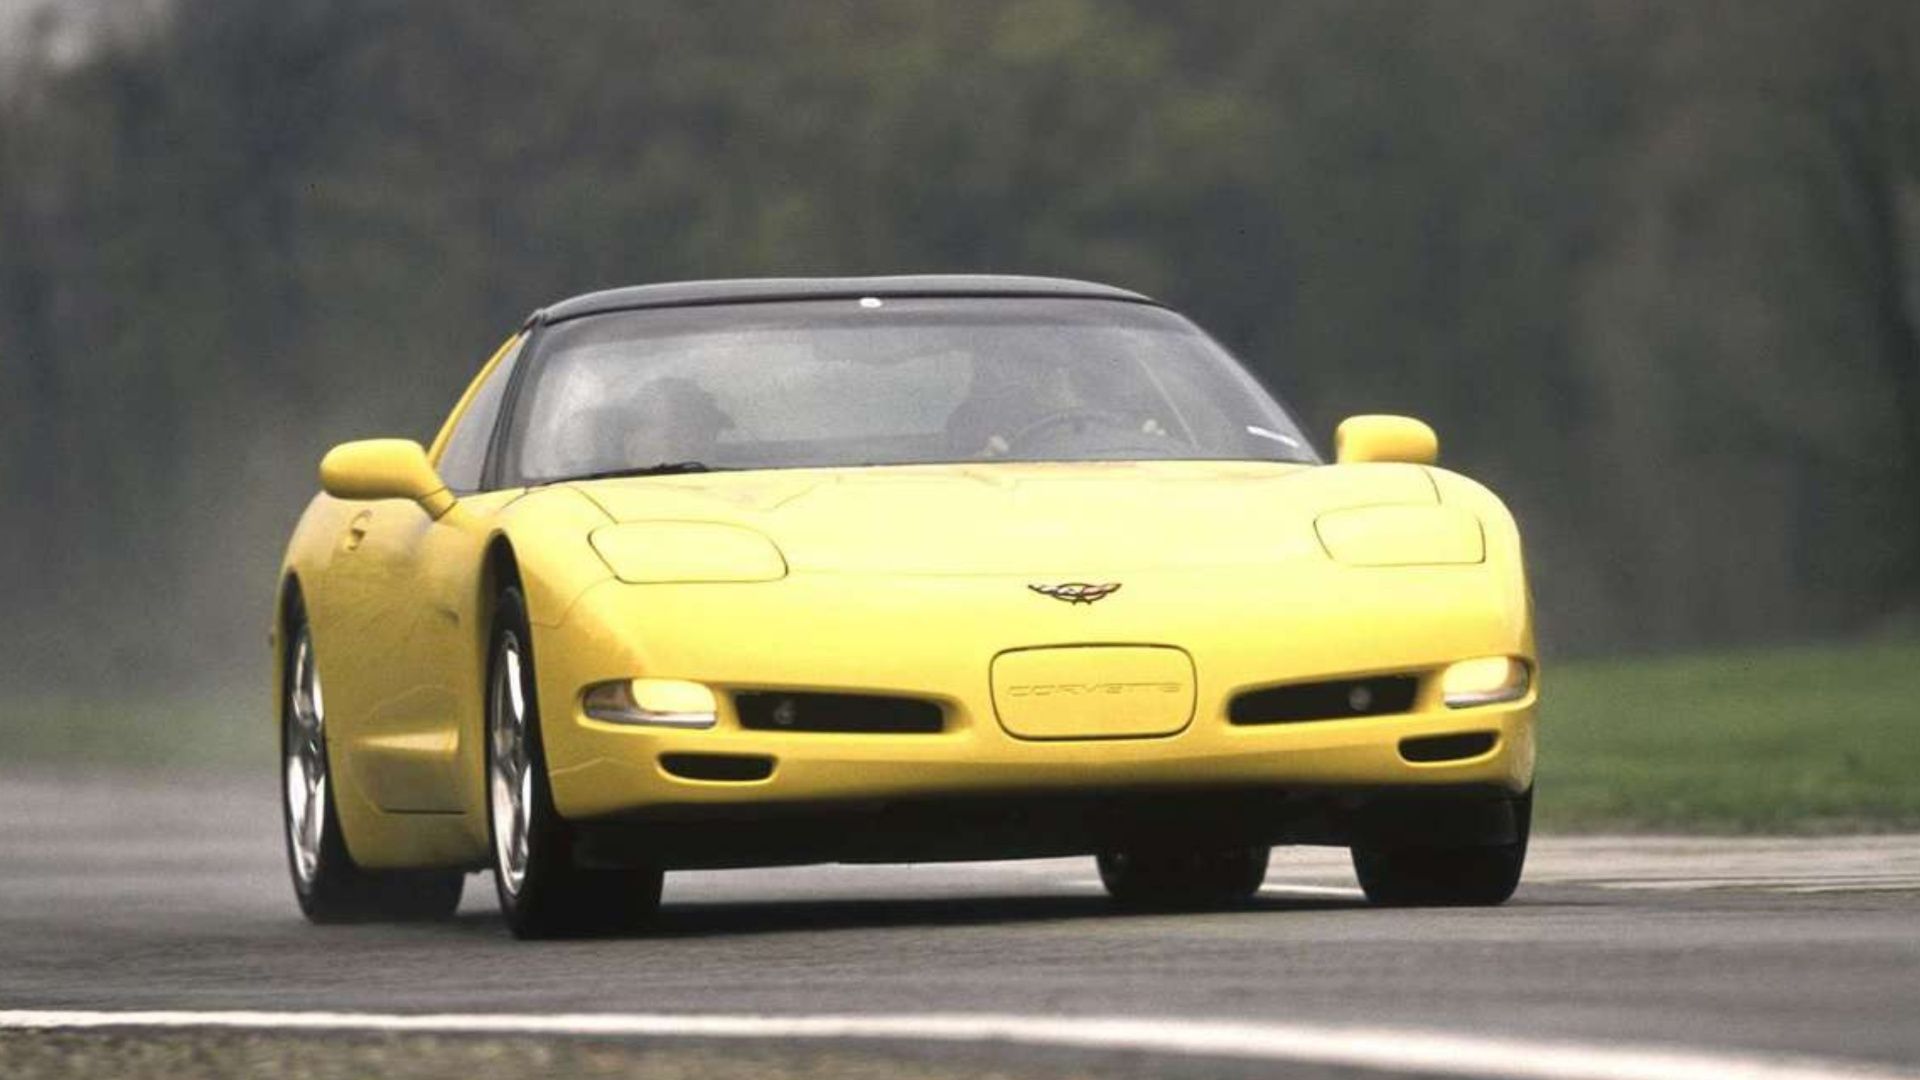 Corvette C5, front profile view on road from distance